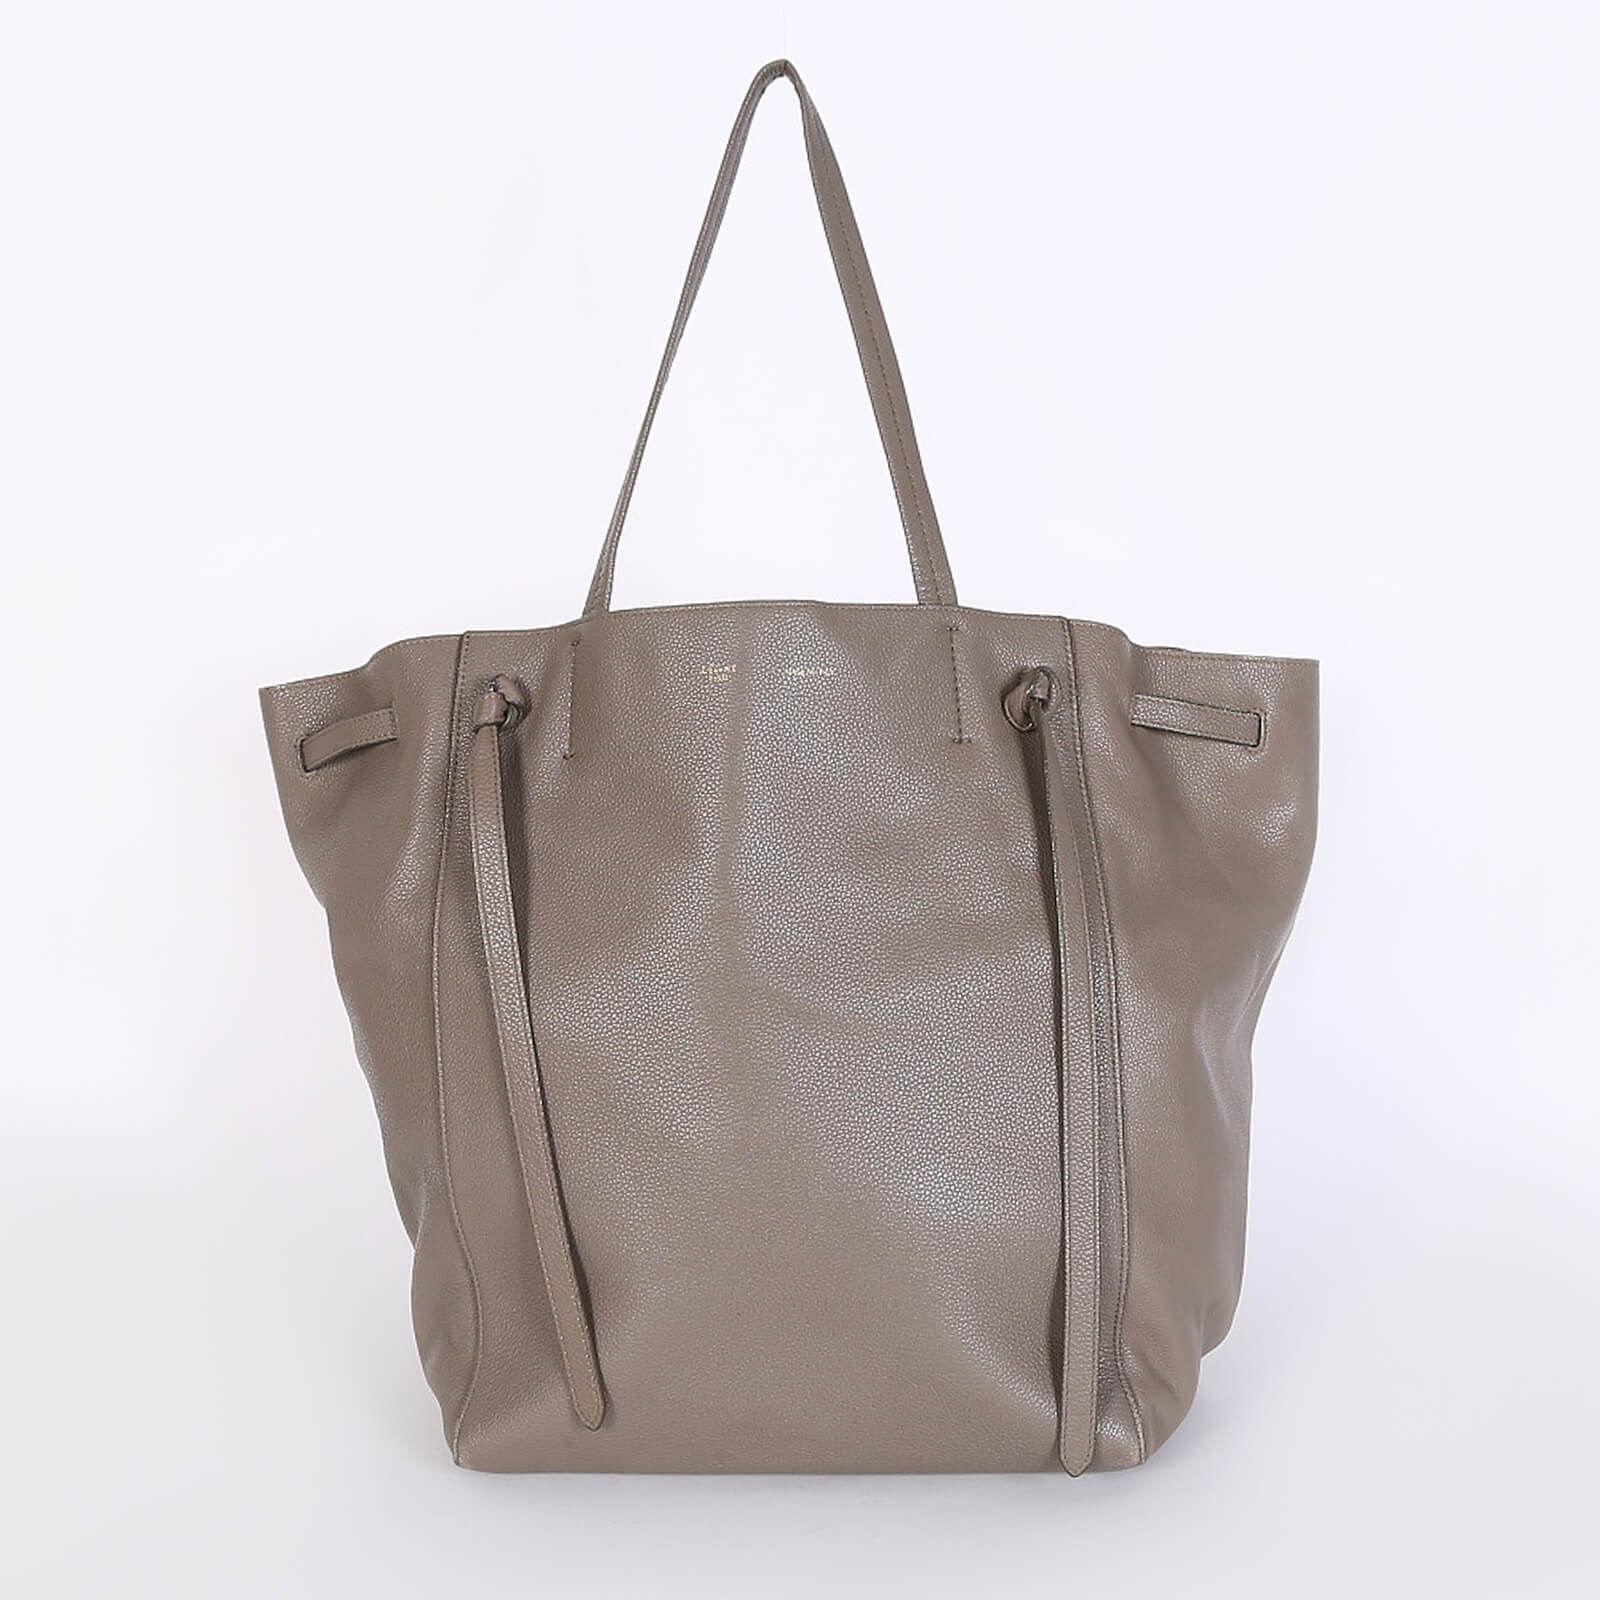 SMALL CABAS PHANTOM IN SOFT GRAINED CALFSKIN - TAUPE